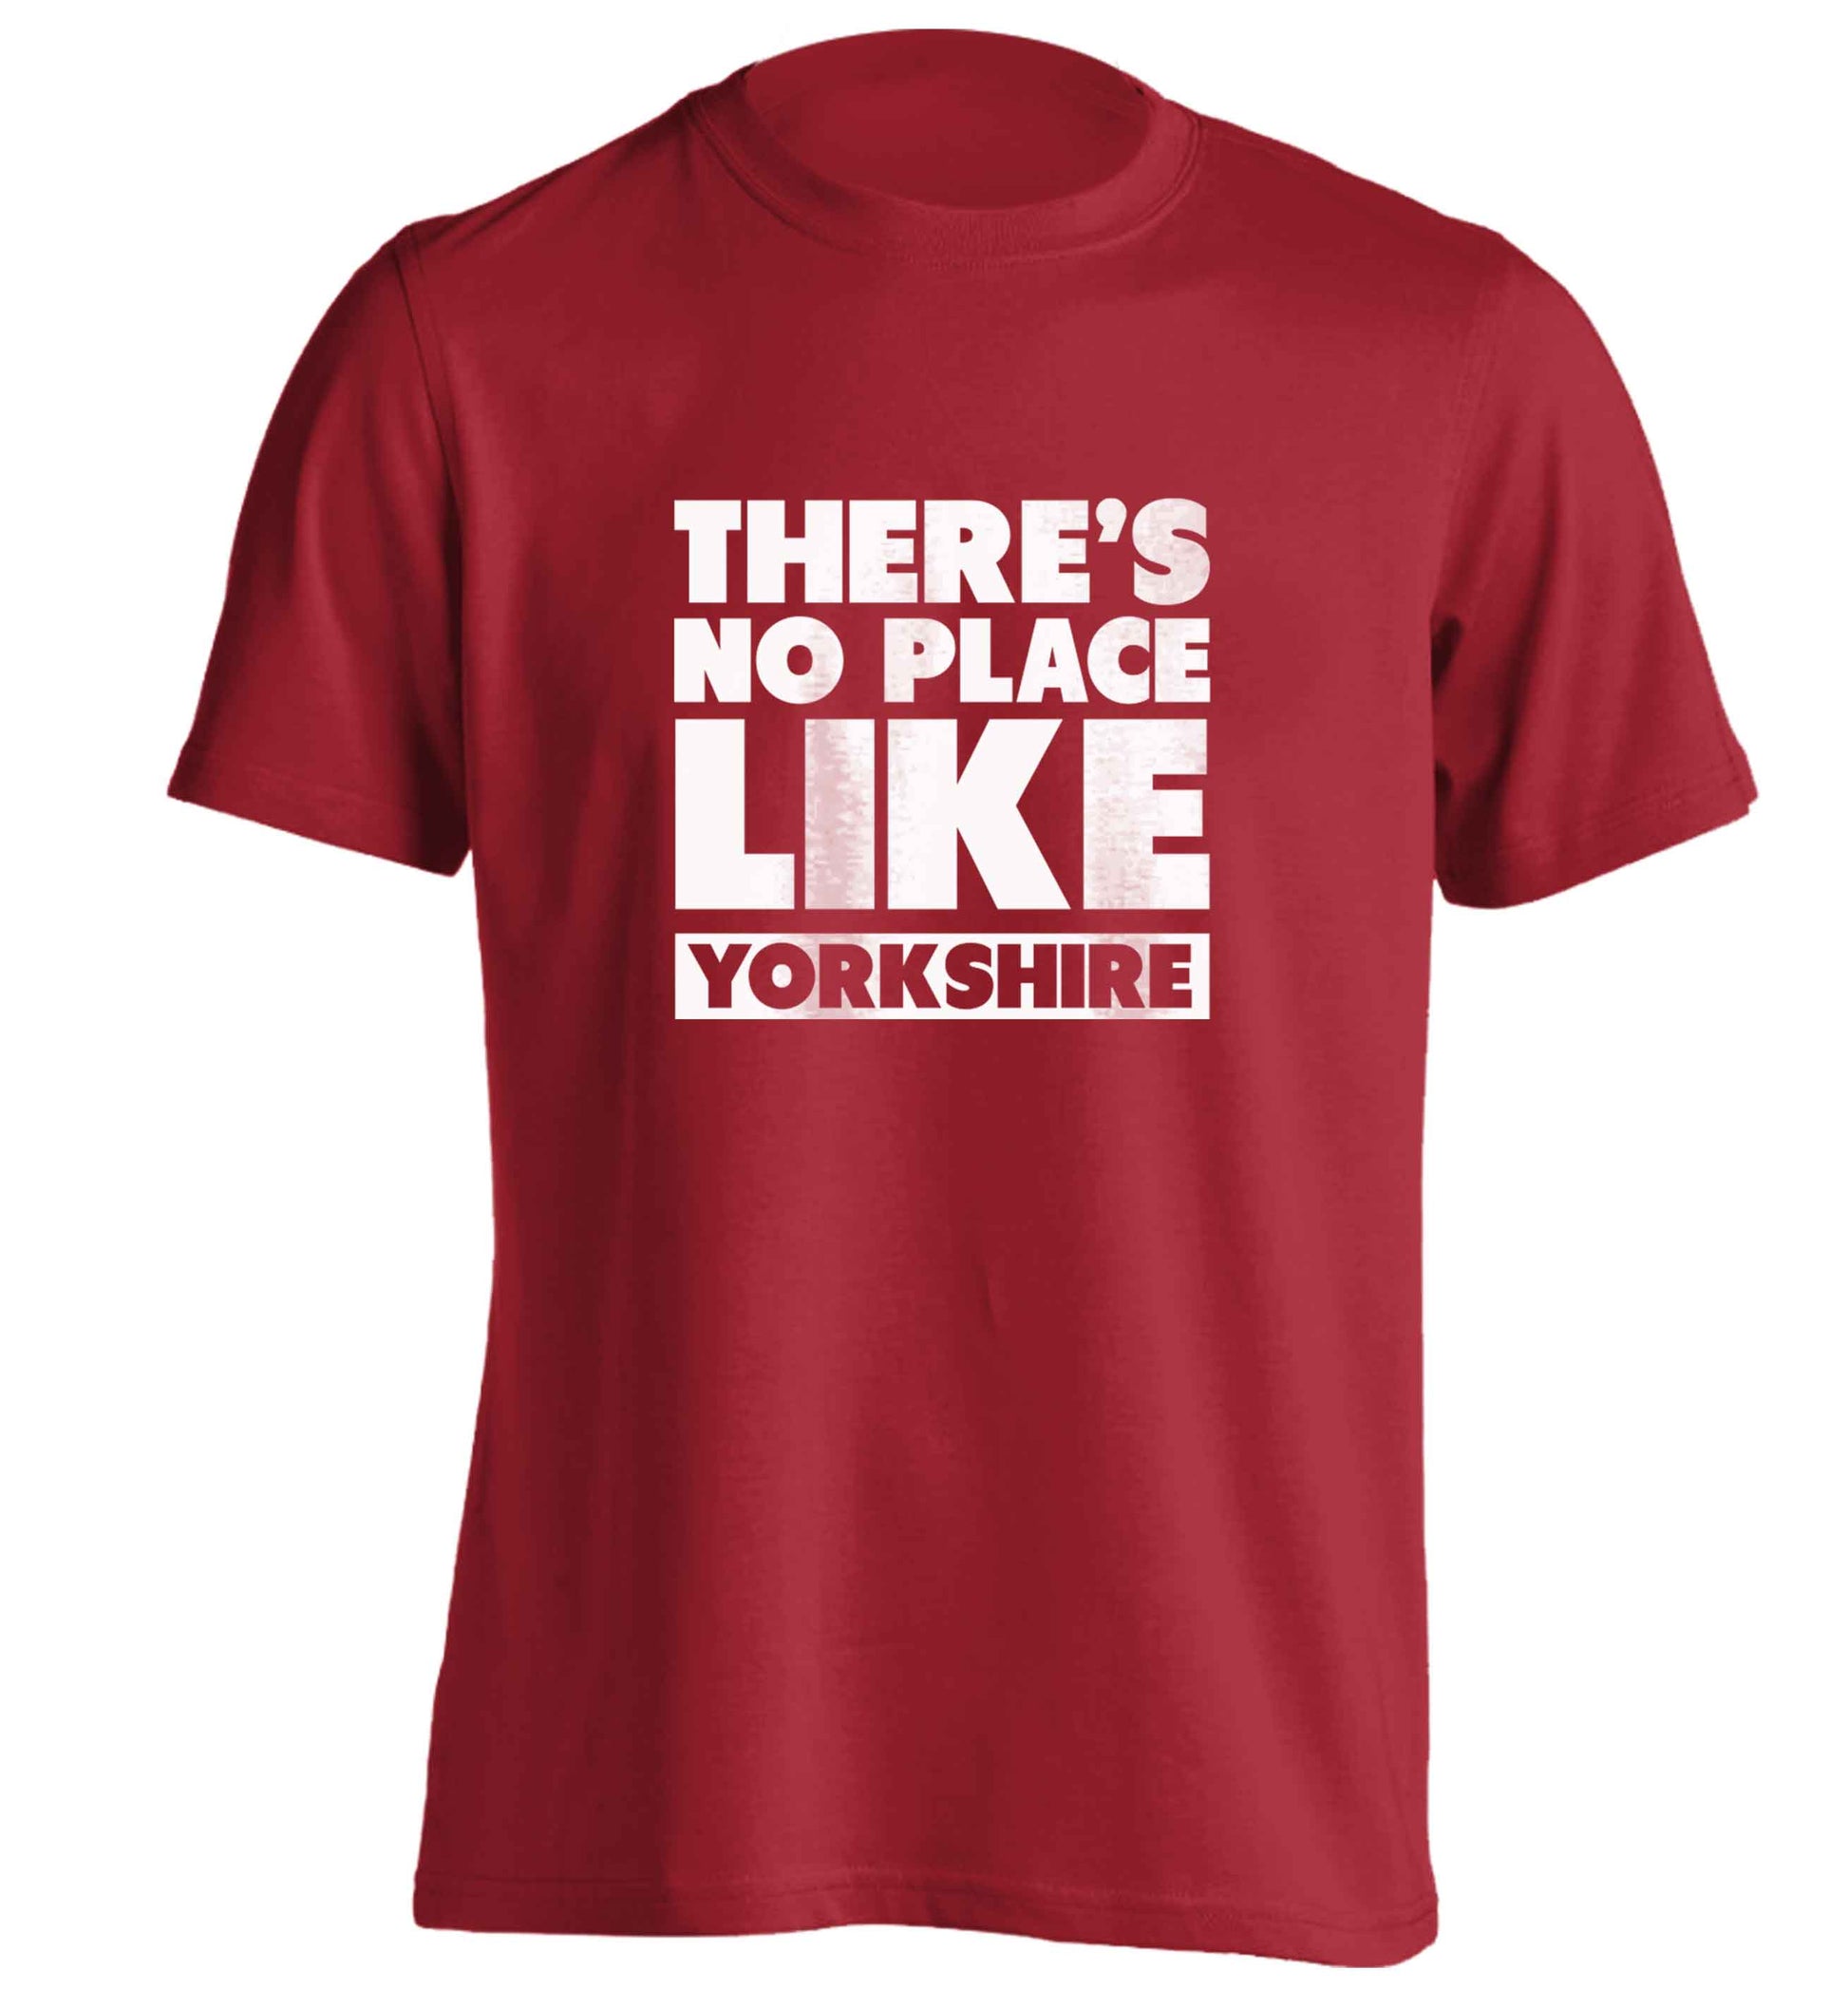 There's no place like Yorkshire adults unisex red Tshirt 2XL